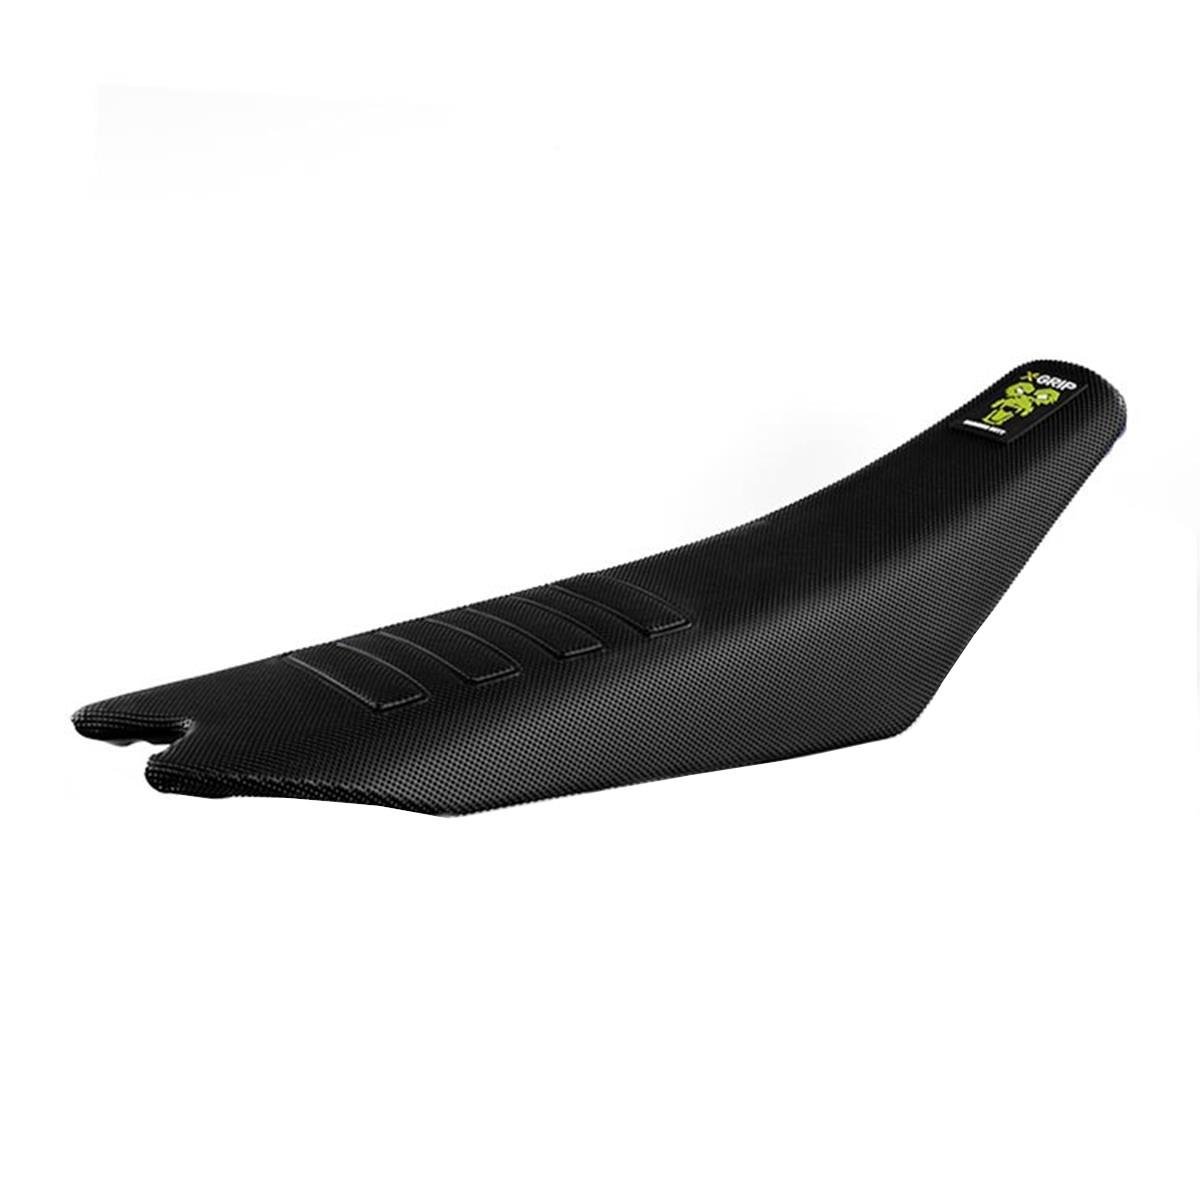 X-Grip Seat Cover Baboons Butt Beta RR, XTrainer 13-19, Black